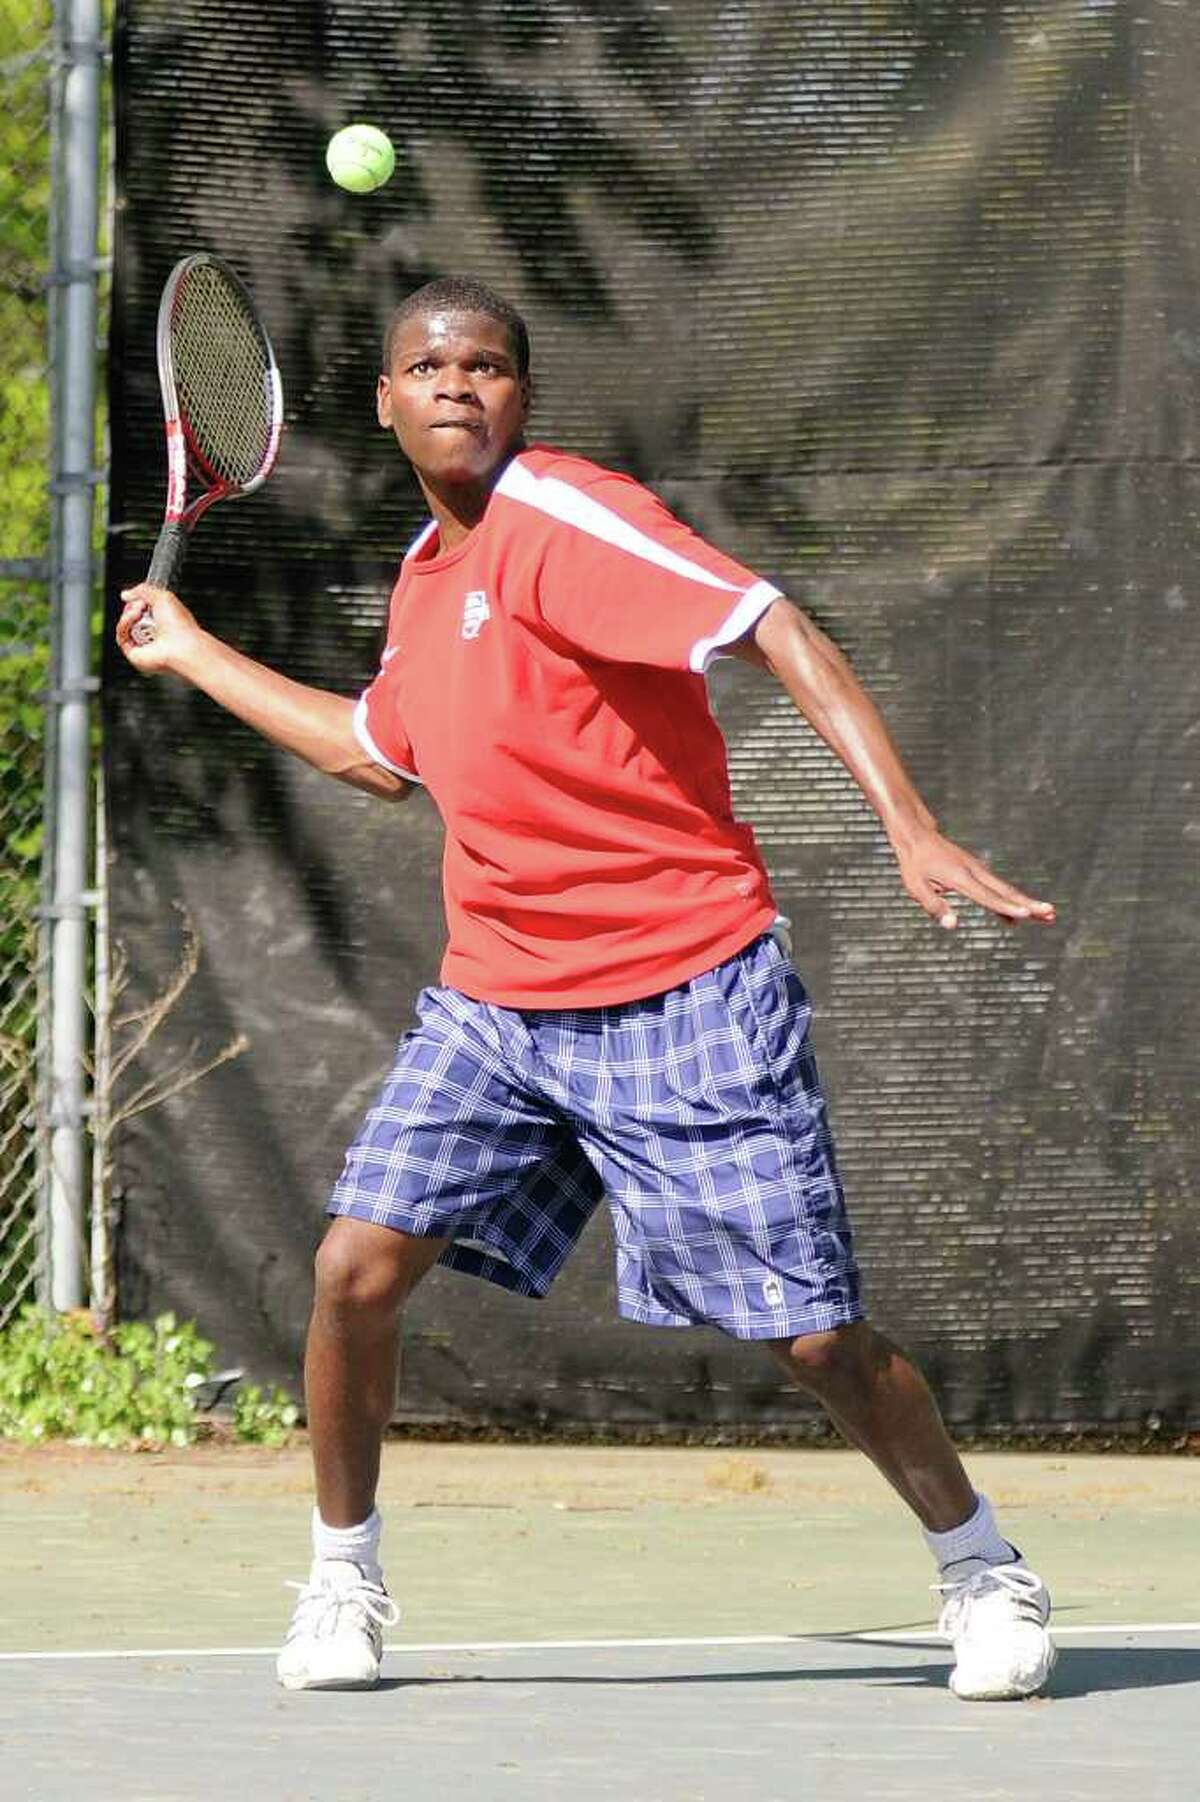 McMahon's Dreshawn Lewis returns a volley in a boys varsity tennis match as Brien McMahon High School hosts Fairfield Ludlowe High School in Norwalk, CT on Monday May 9, 2011.